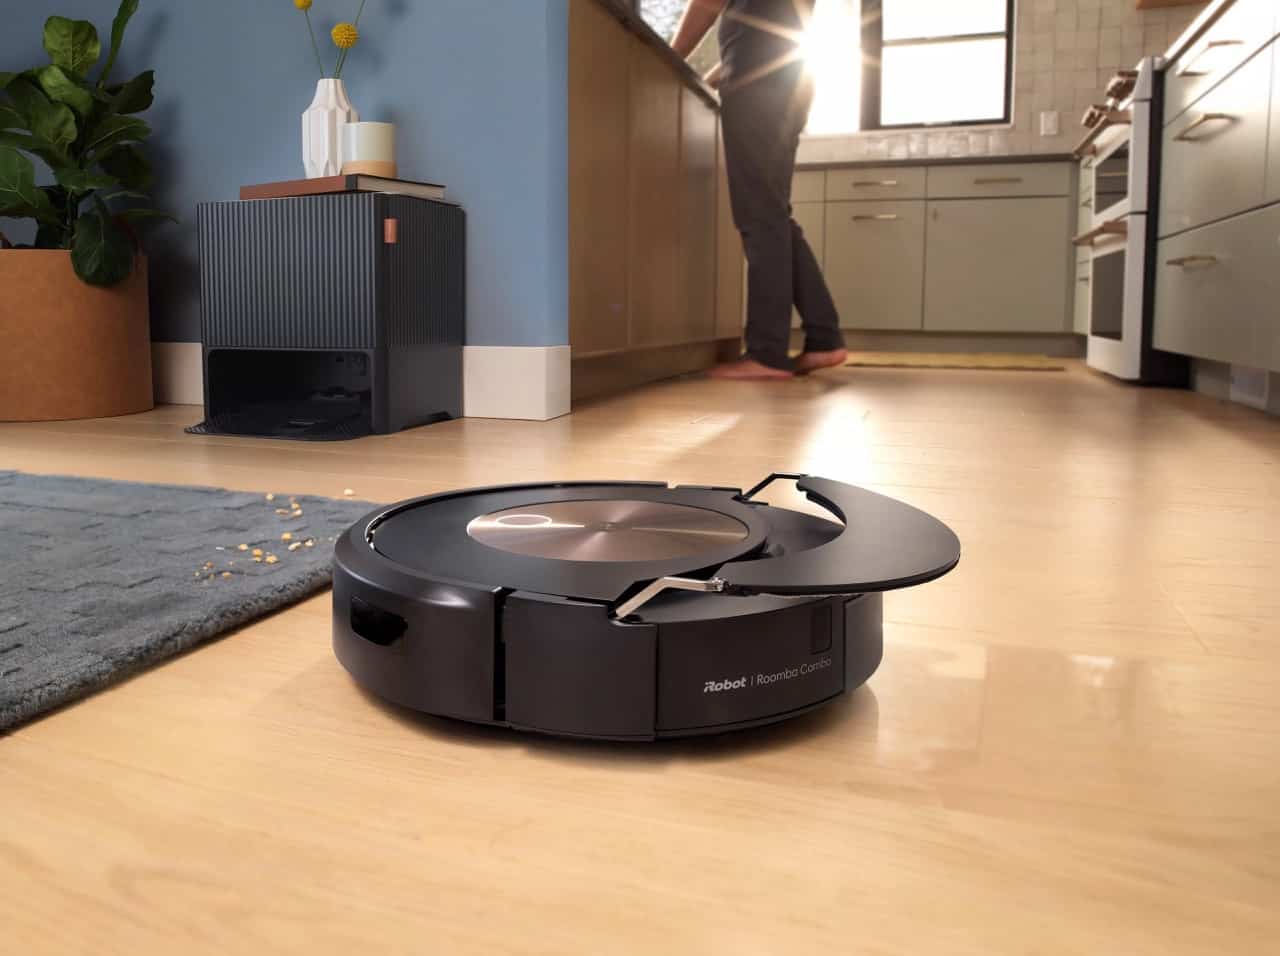 Roomba Combo j9+ CleanBase Auto Fill Lifestyle ArmLifting Large